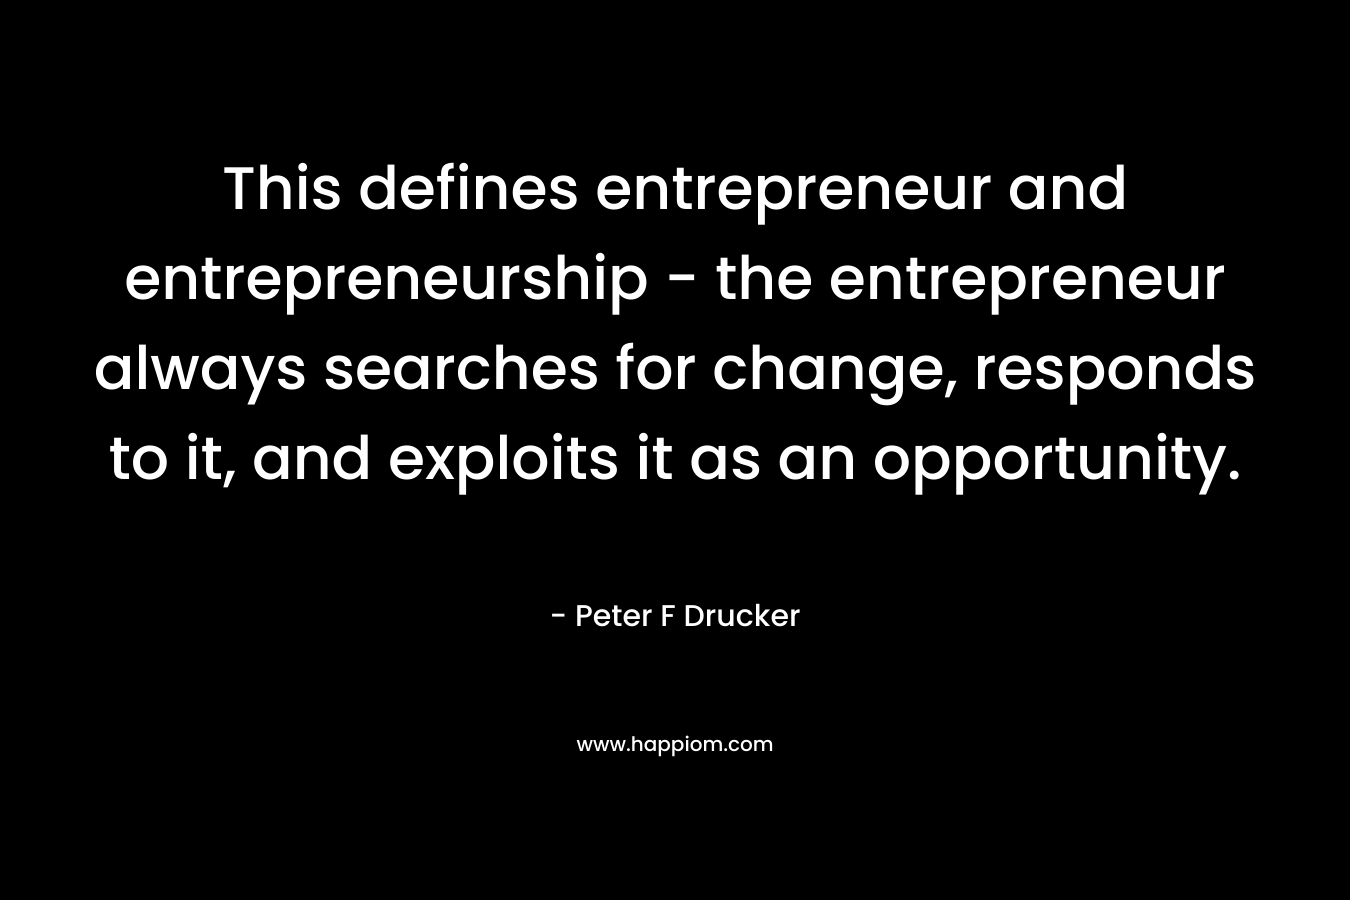 This defines entrepreneur and entrepreneurship – the entrepreneur always searches for change, responds to it, and exploits it as an opportunity. – Peter F Drucker